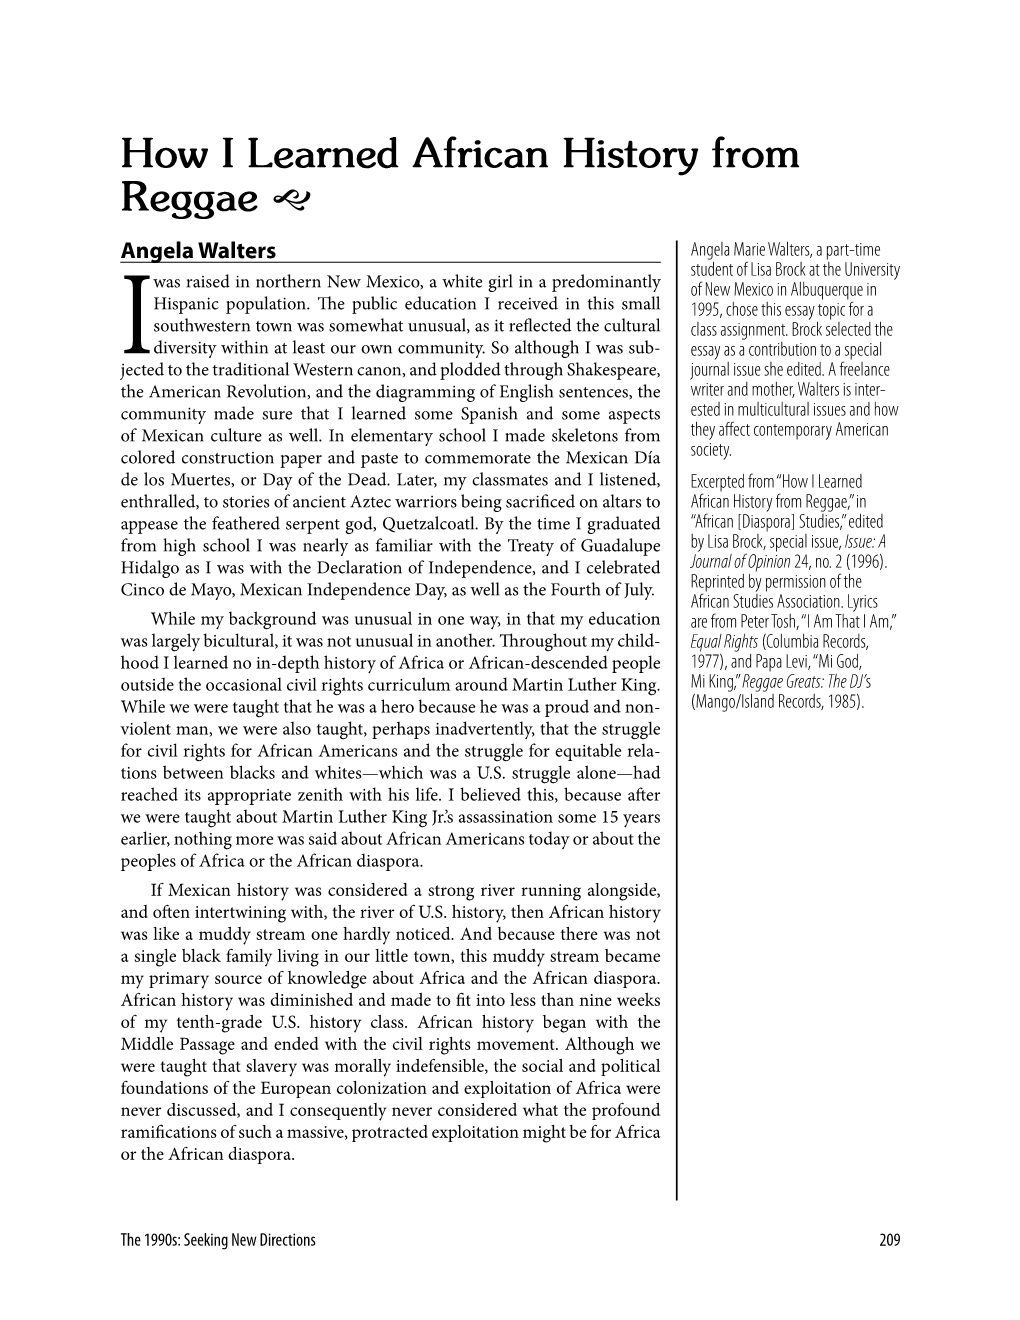 How I Learned African History from Reggae